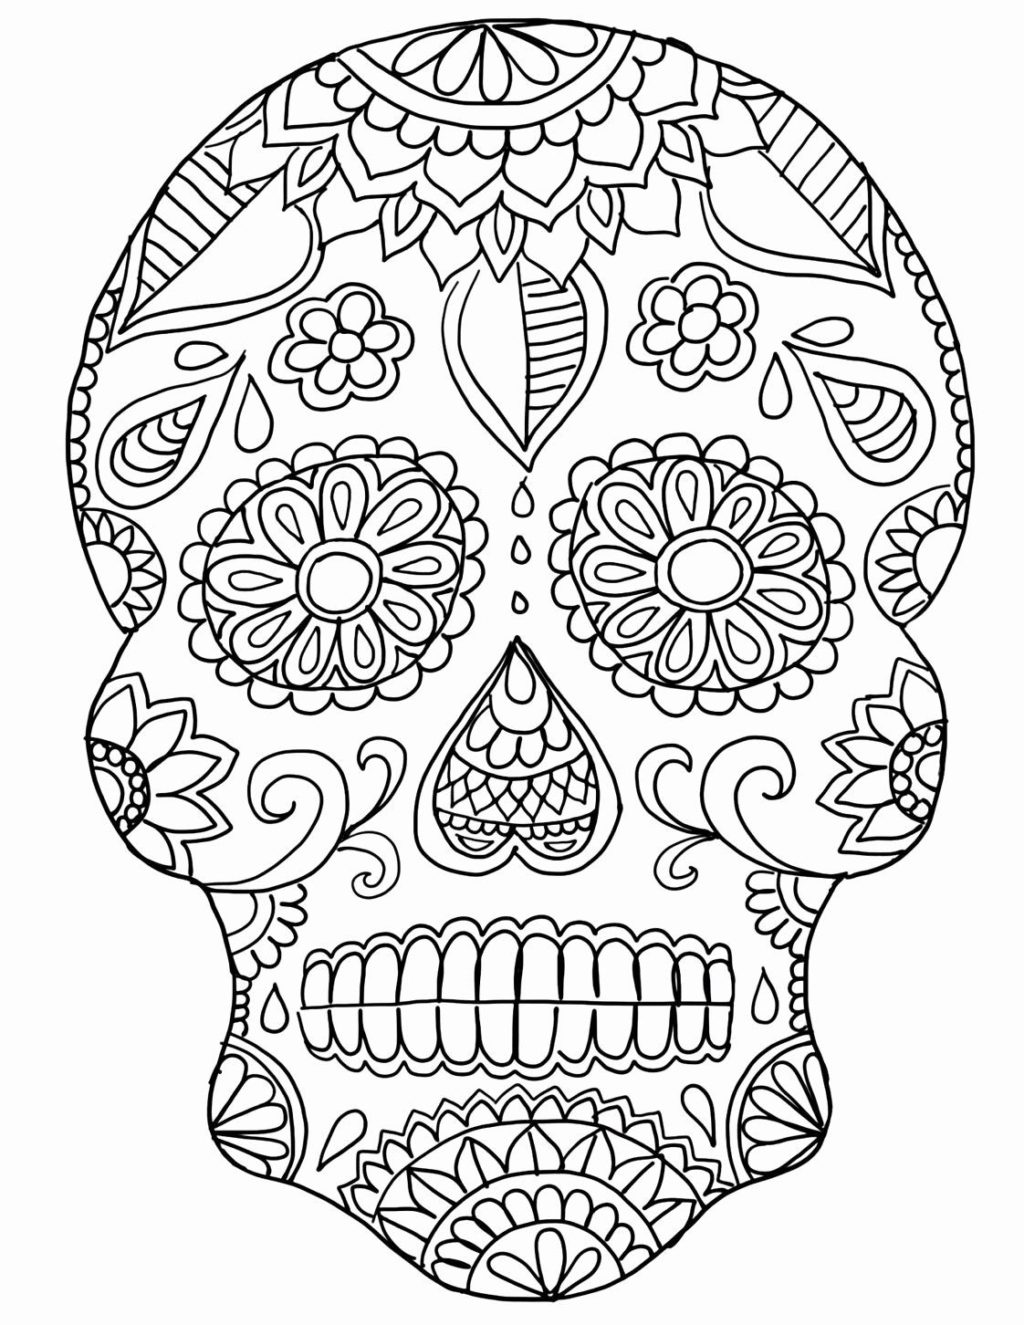 coloring pages : Excelent Skull Coloring Sheets Marvelous Sugar Pages For  Kids Sheet Amazing Photo Ideas Free Printable Day Of 40 Excelent Skull  Coloring Sheets ~ mommaonamissioninc